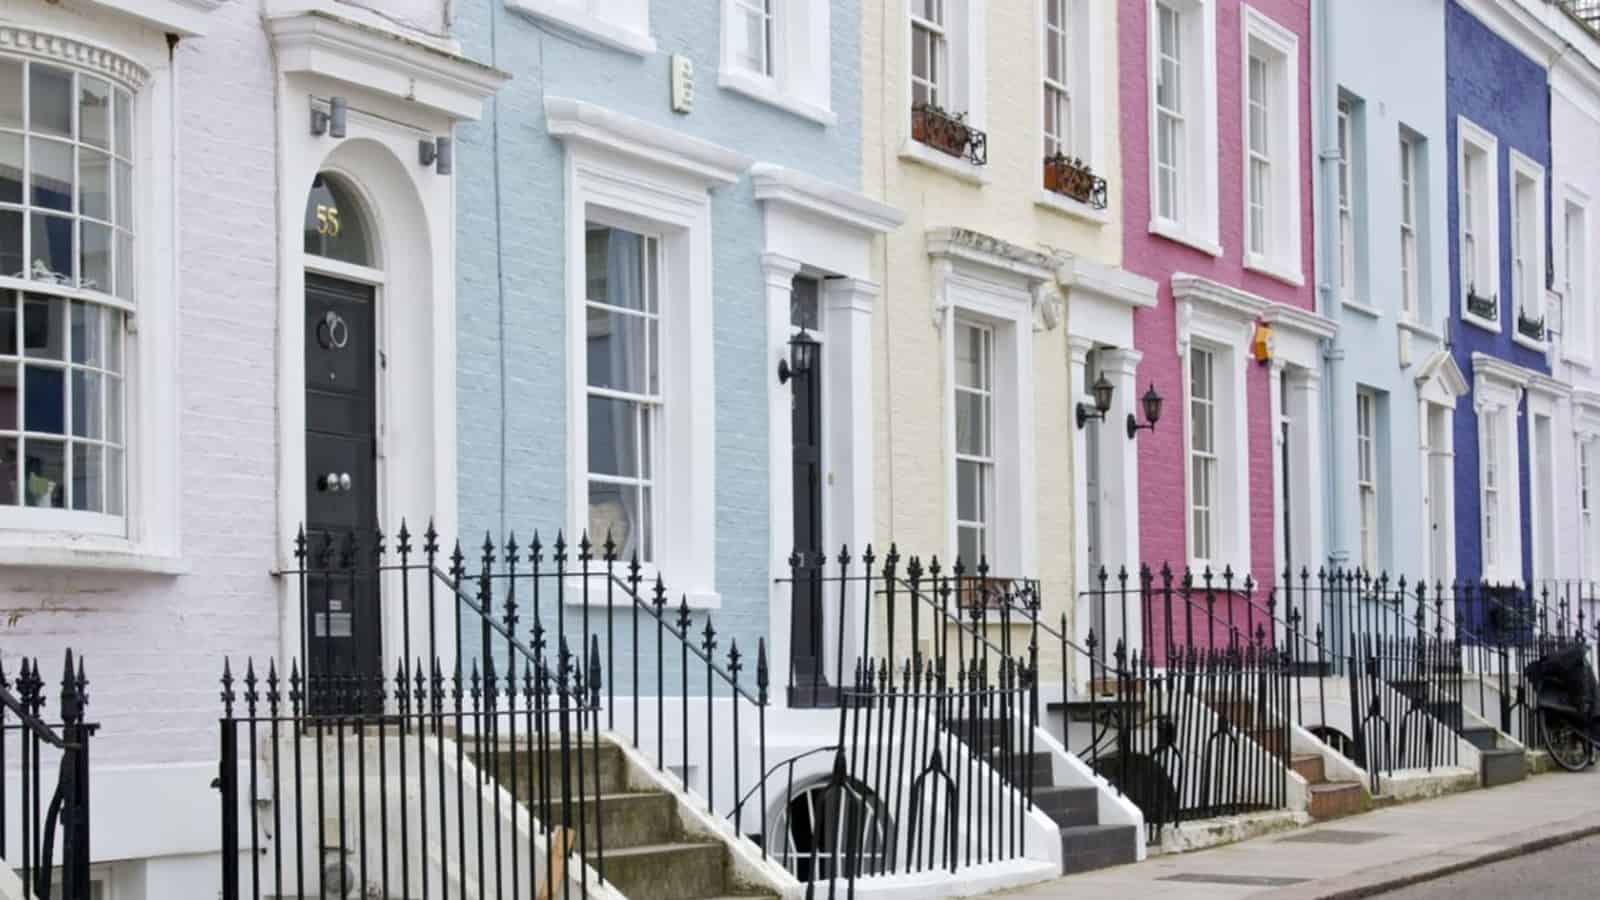 Conveyancing Solicitor in Notting Hill. Stirling Ackroyd Legal